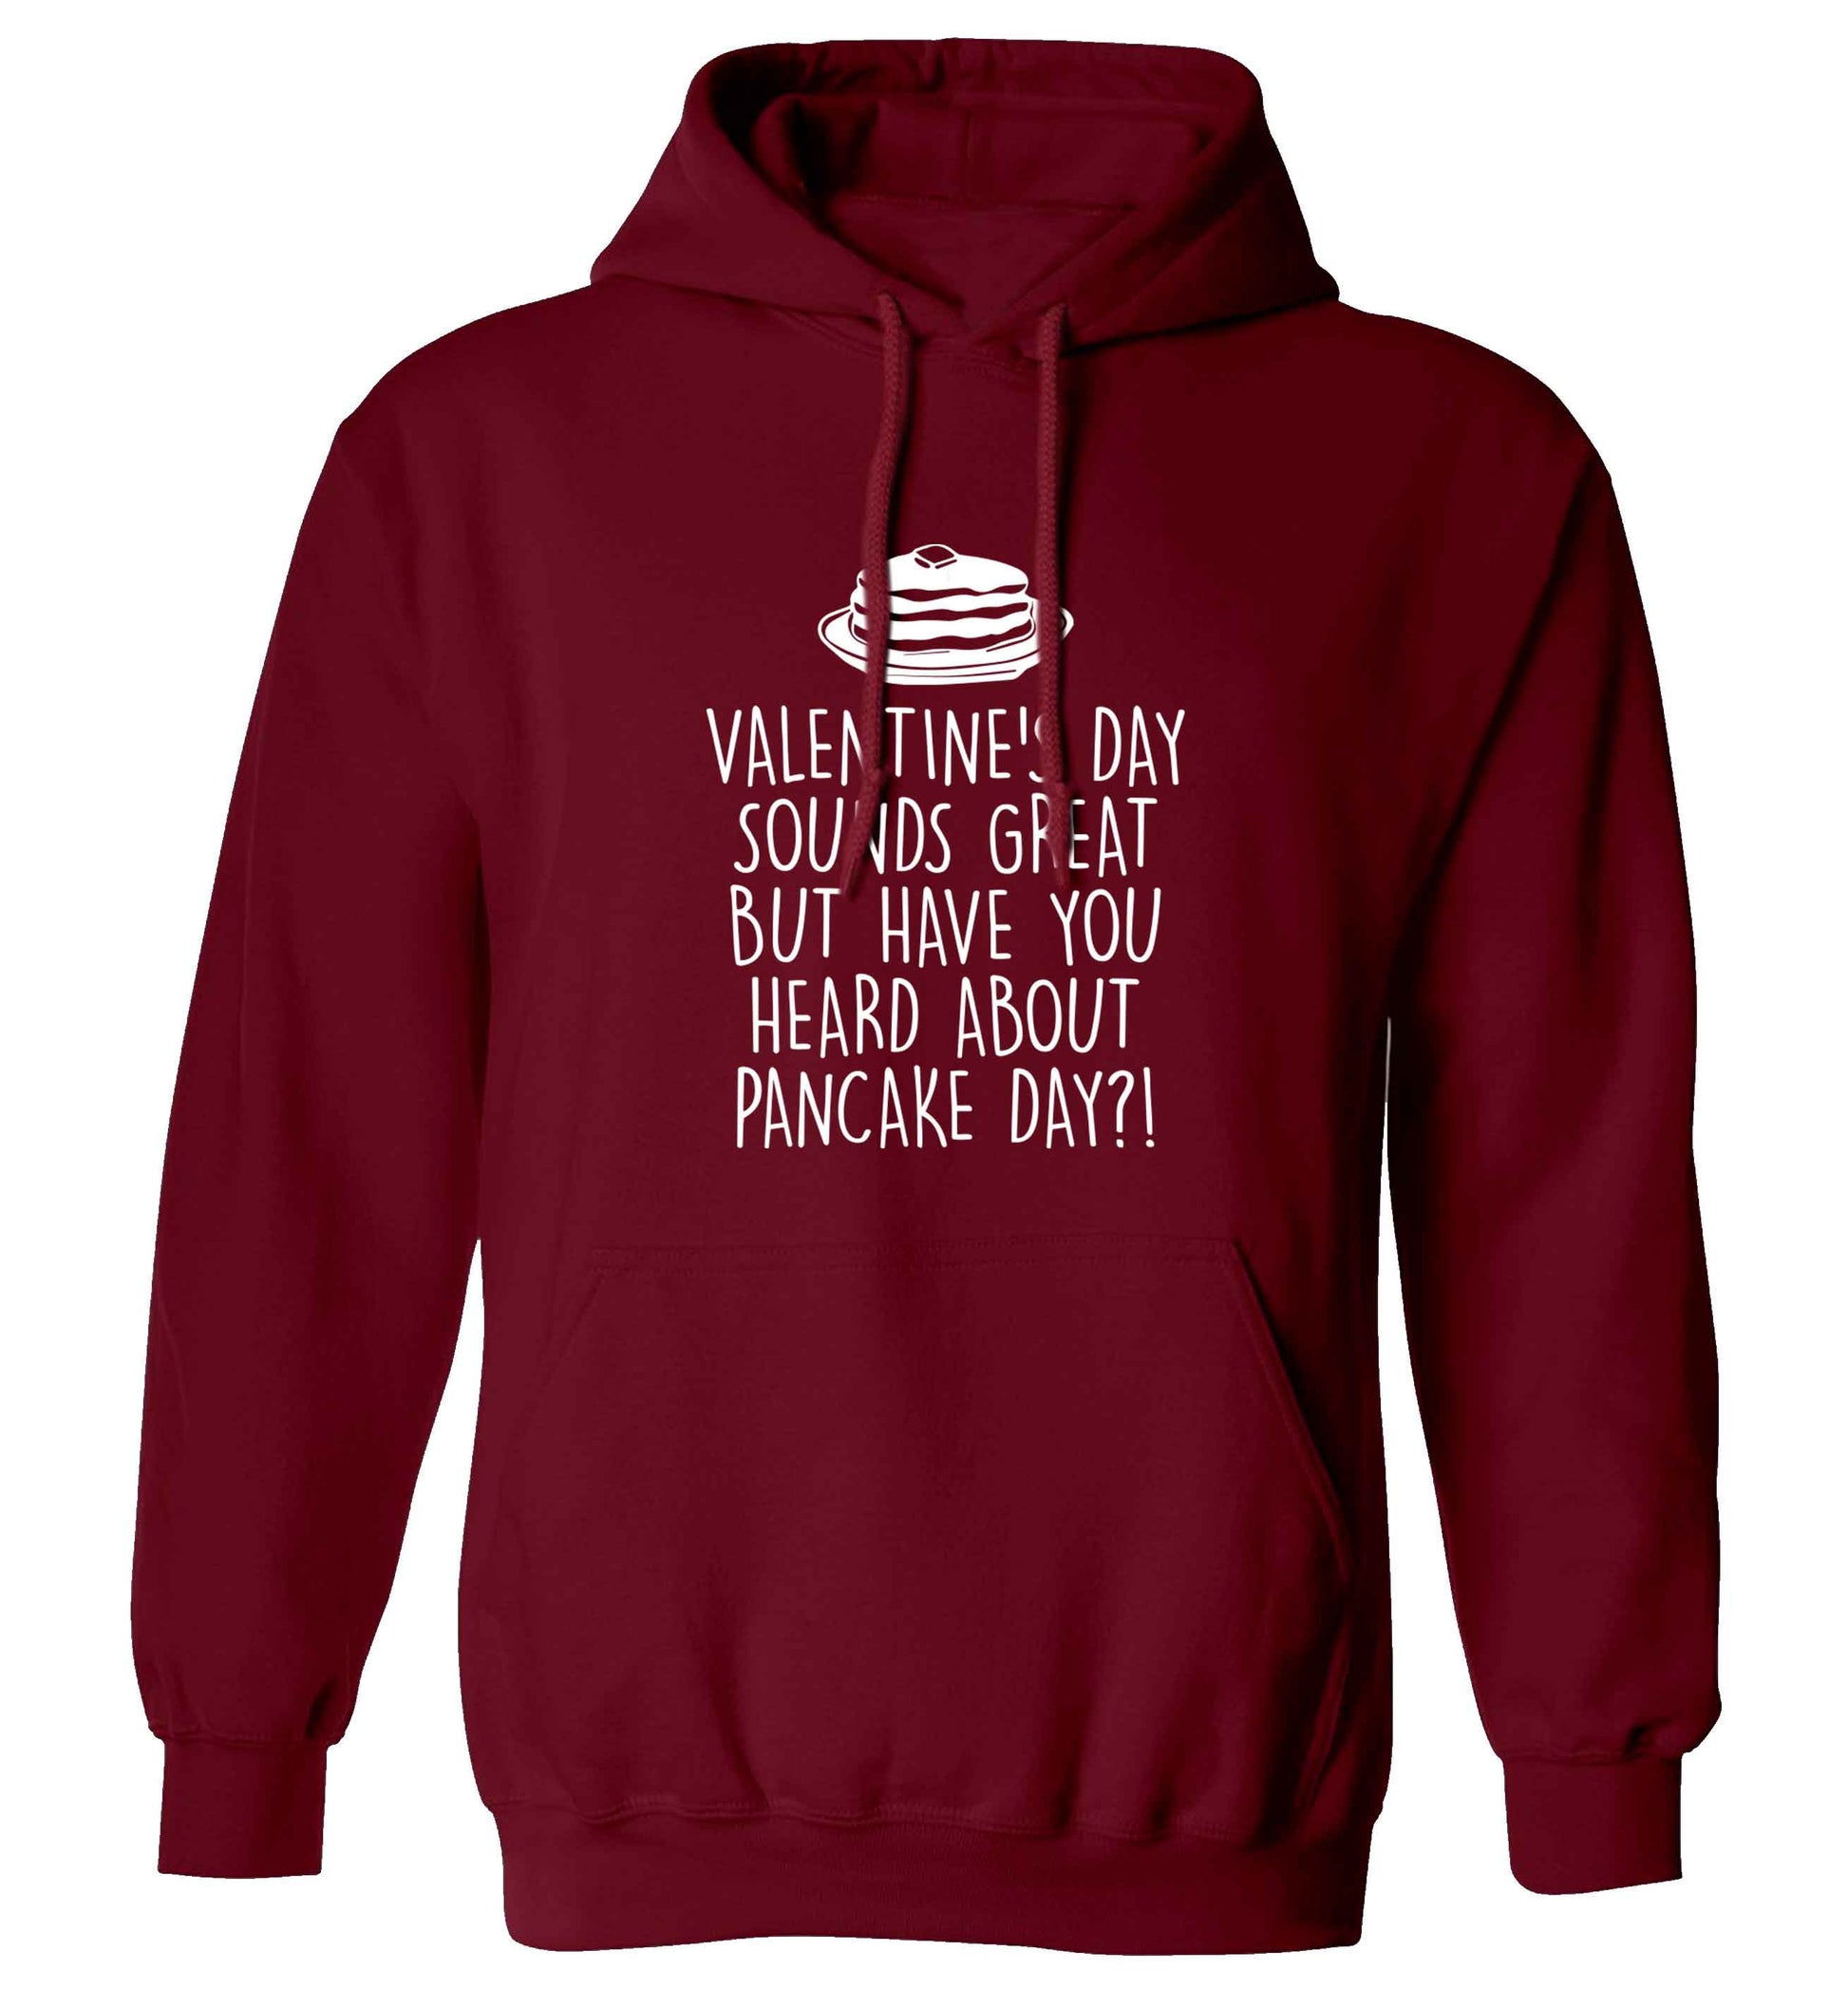 Valentine's day sounds great but have you heard about pancake day?! adults unisex maroon hoodie 2XL